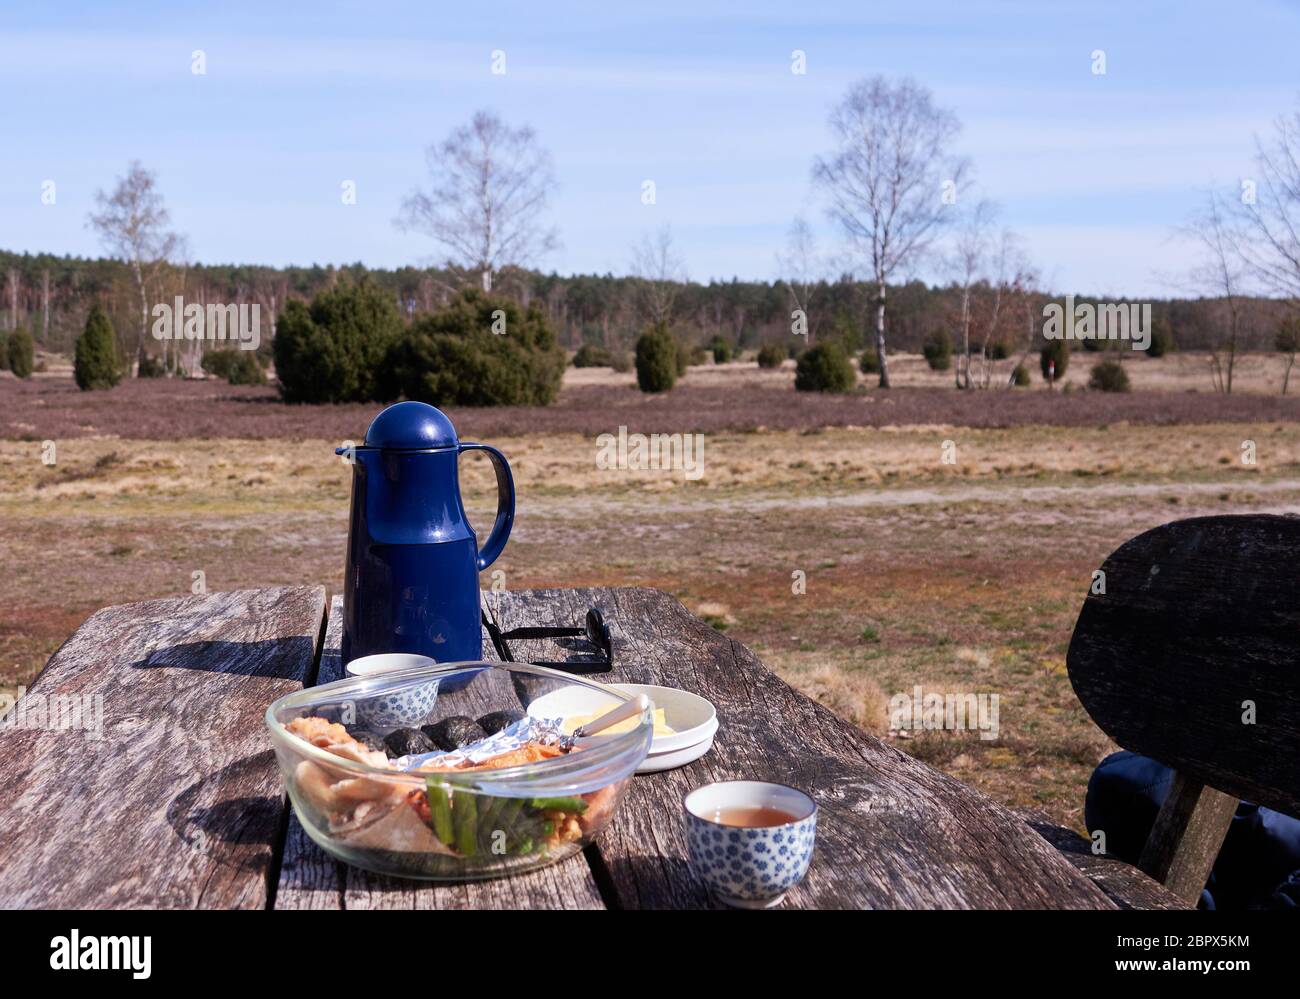 Picnic in the heath on a rustic wooden table Stock Photo